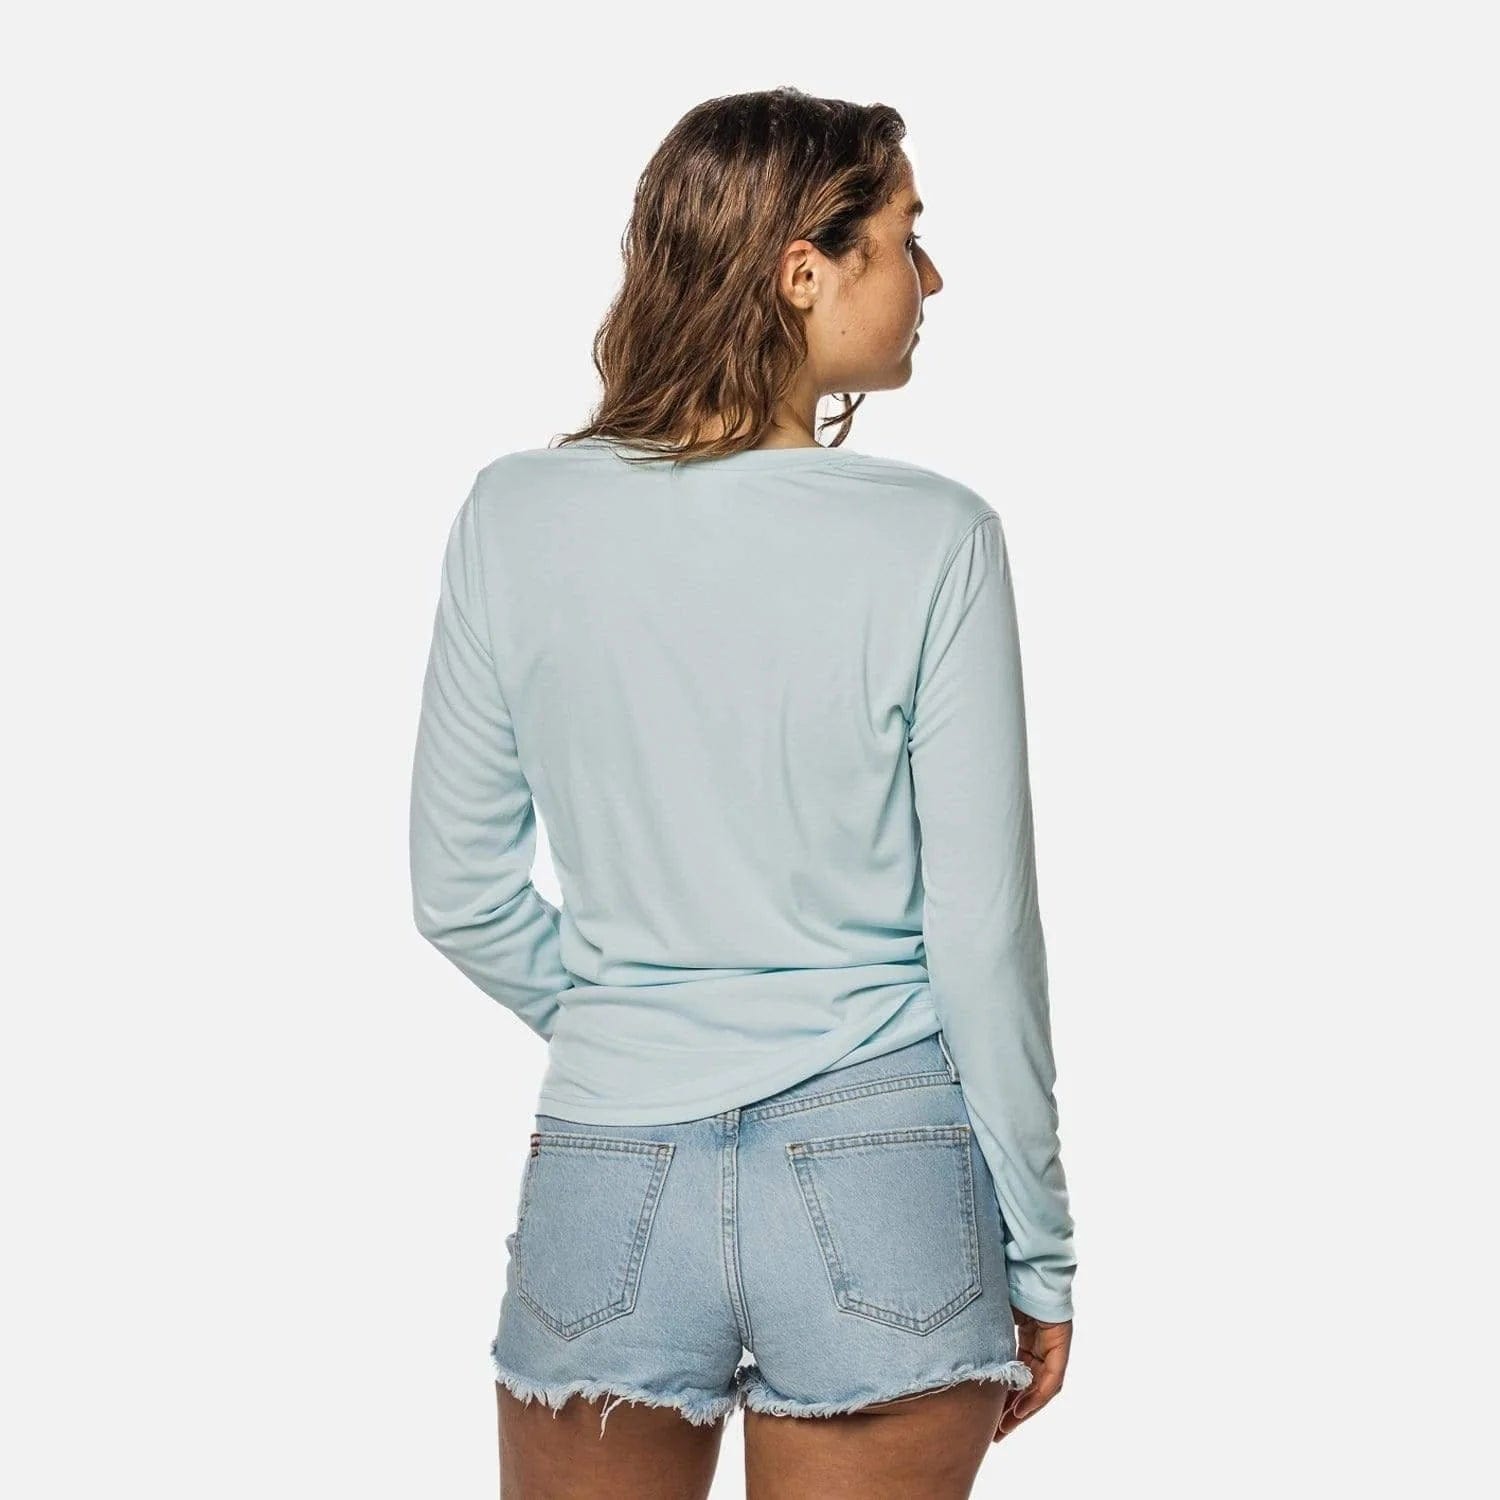 Zella Seamless Dip Dye Long Sleeve Tee, 50+ Products Our Editors Are  Buying to Be Their Best Selves in 2020